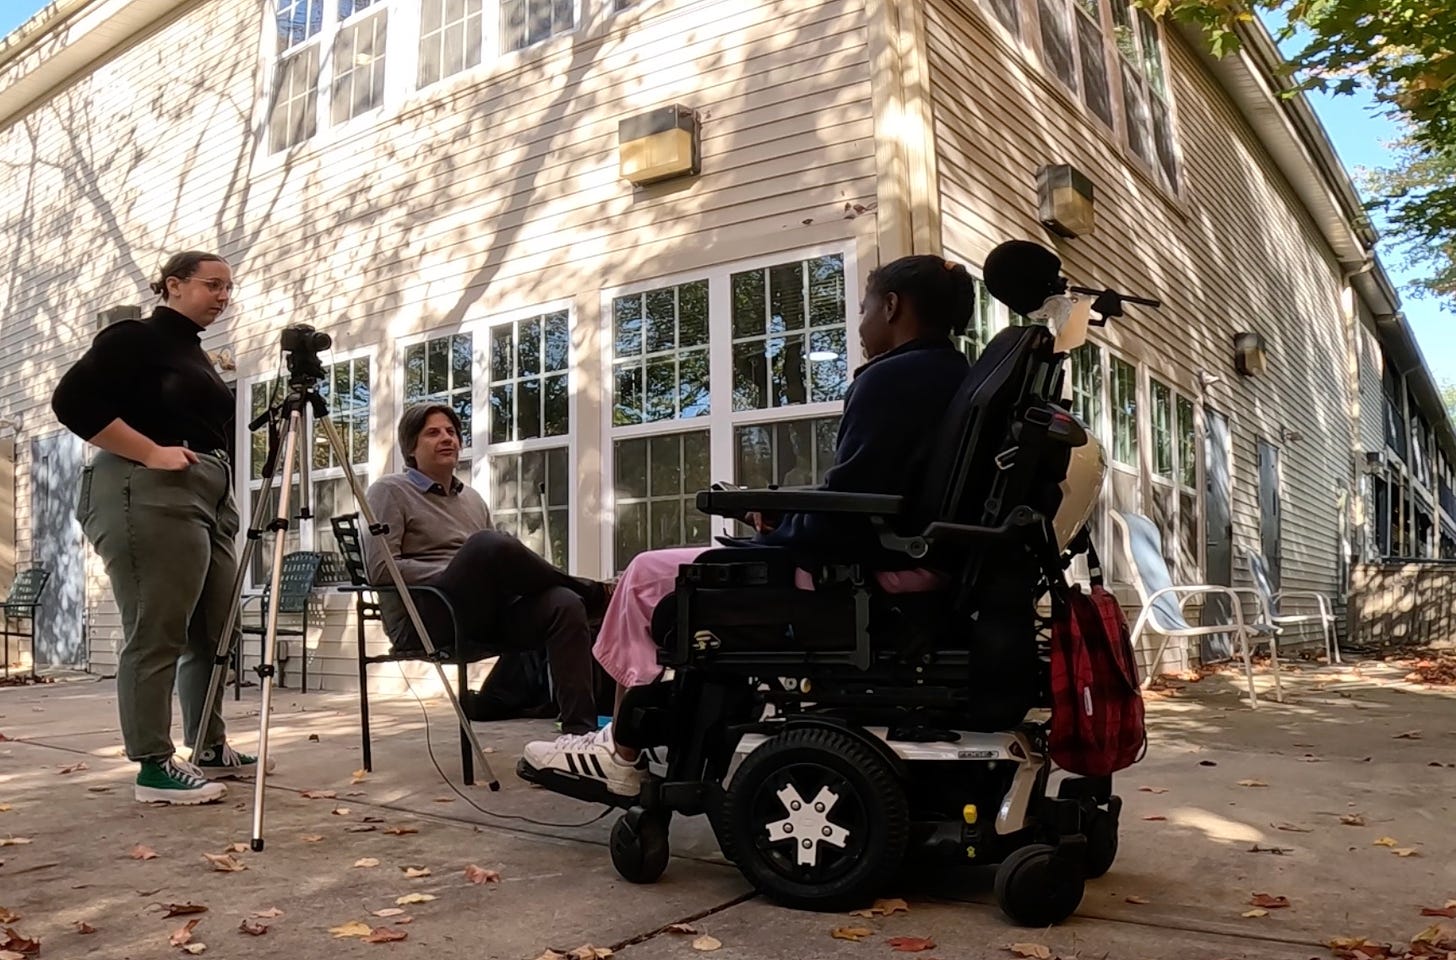  A woman in a power wheelchair is seated at an outdoor patio. Ahead of her is a man seated in a chair and a woman standing behind a camera that is mounted to a tripod. 